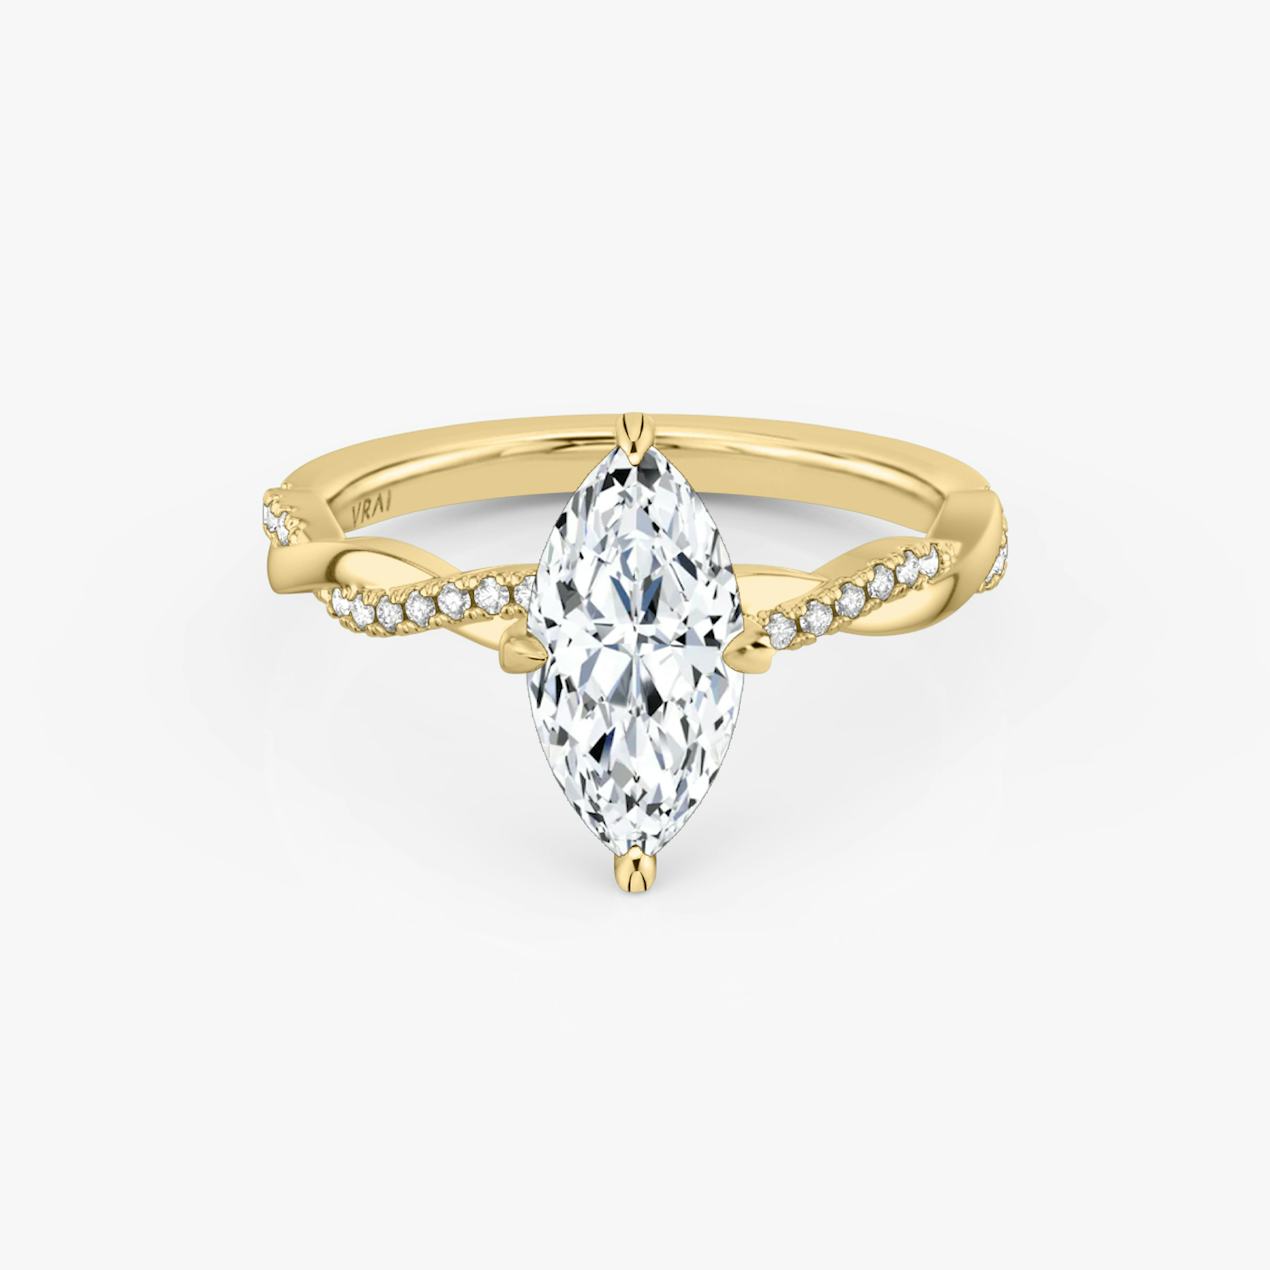 How Many Facets Does a Marquise Diamond have?